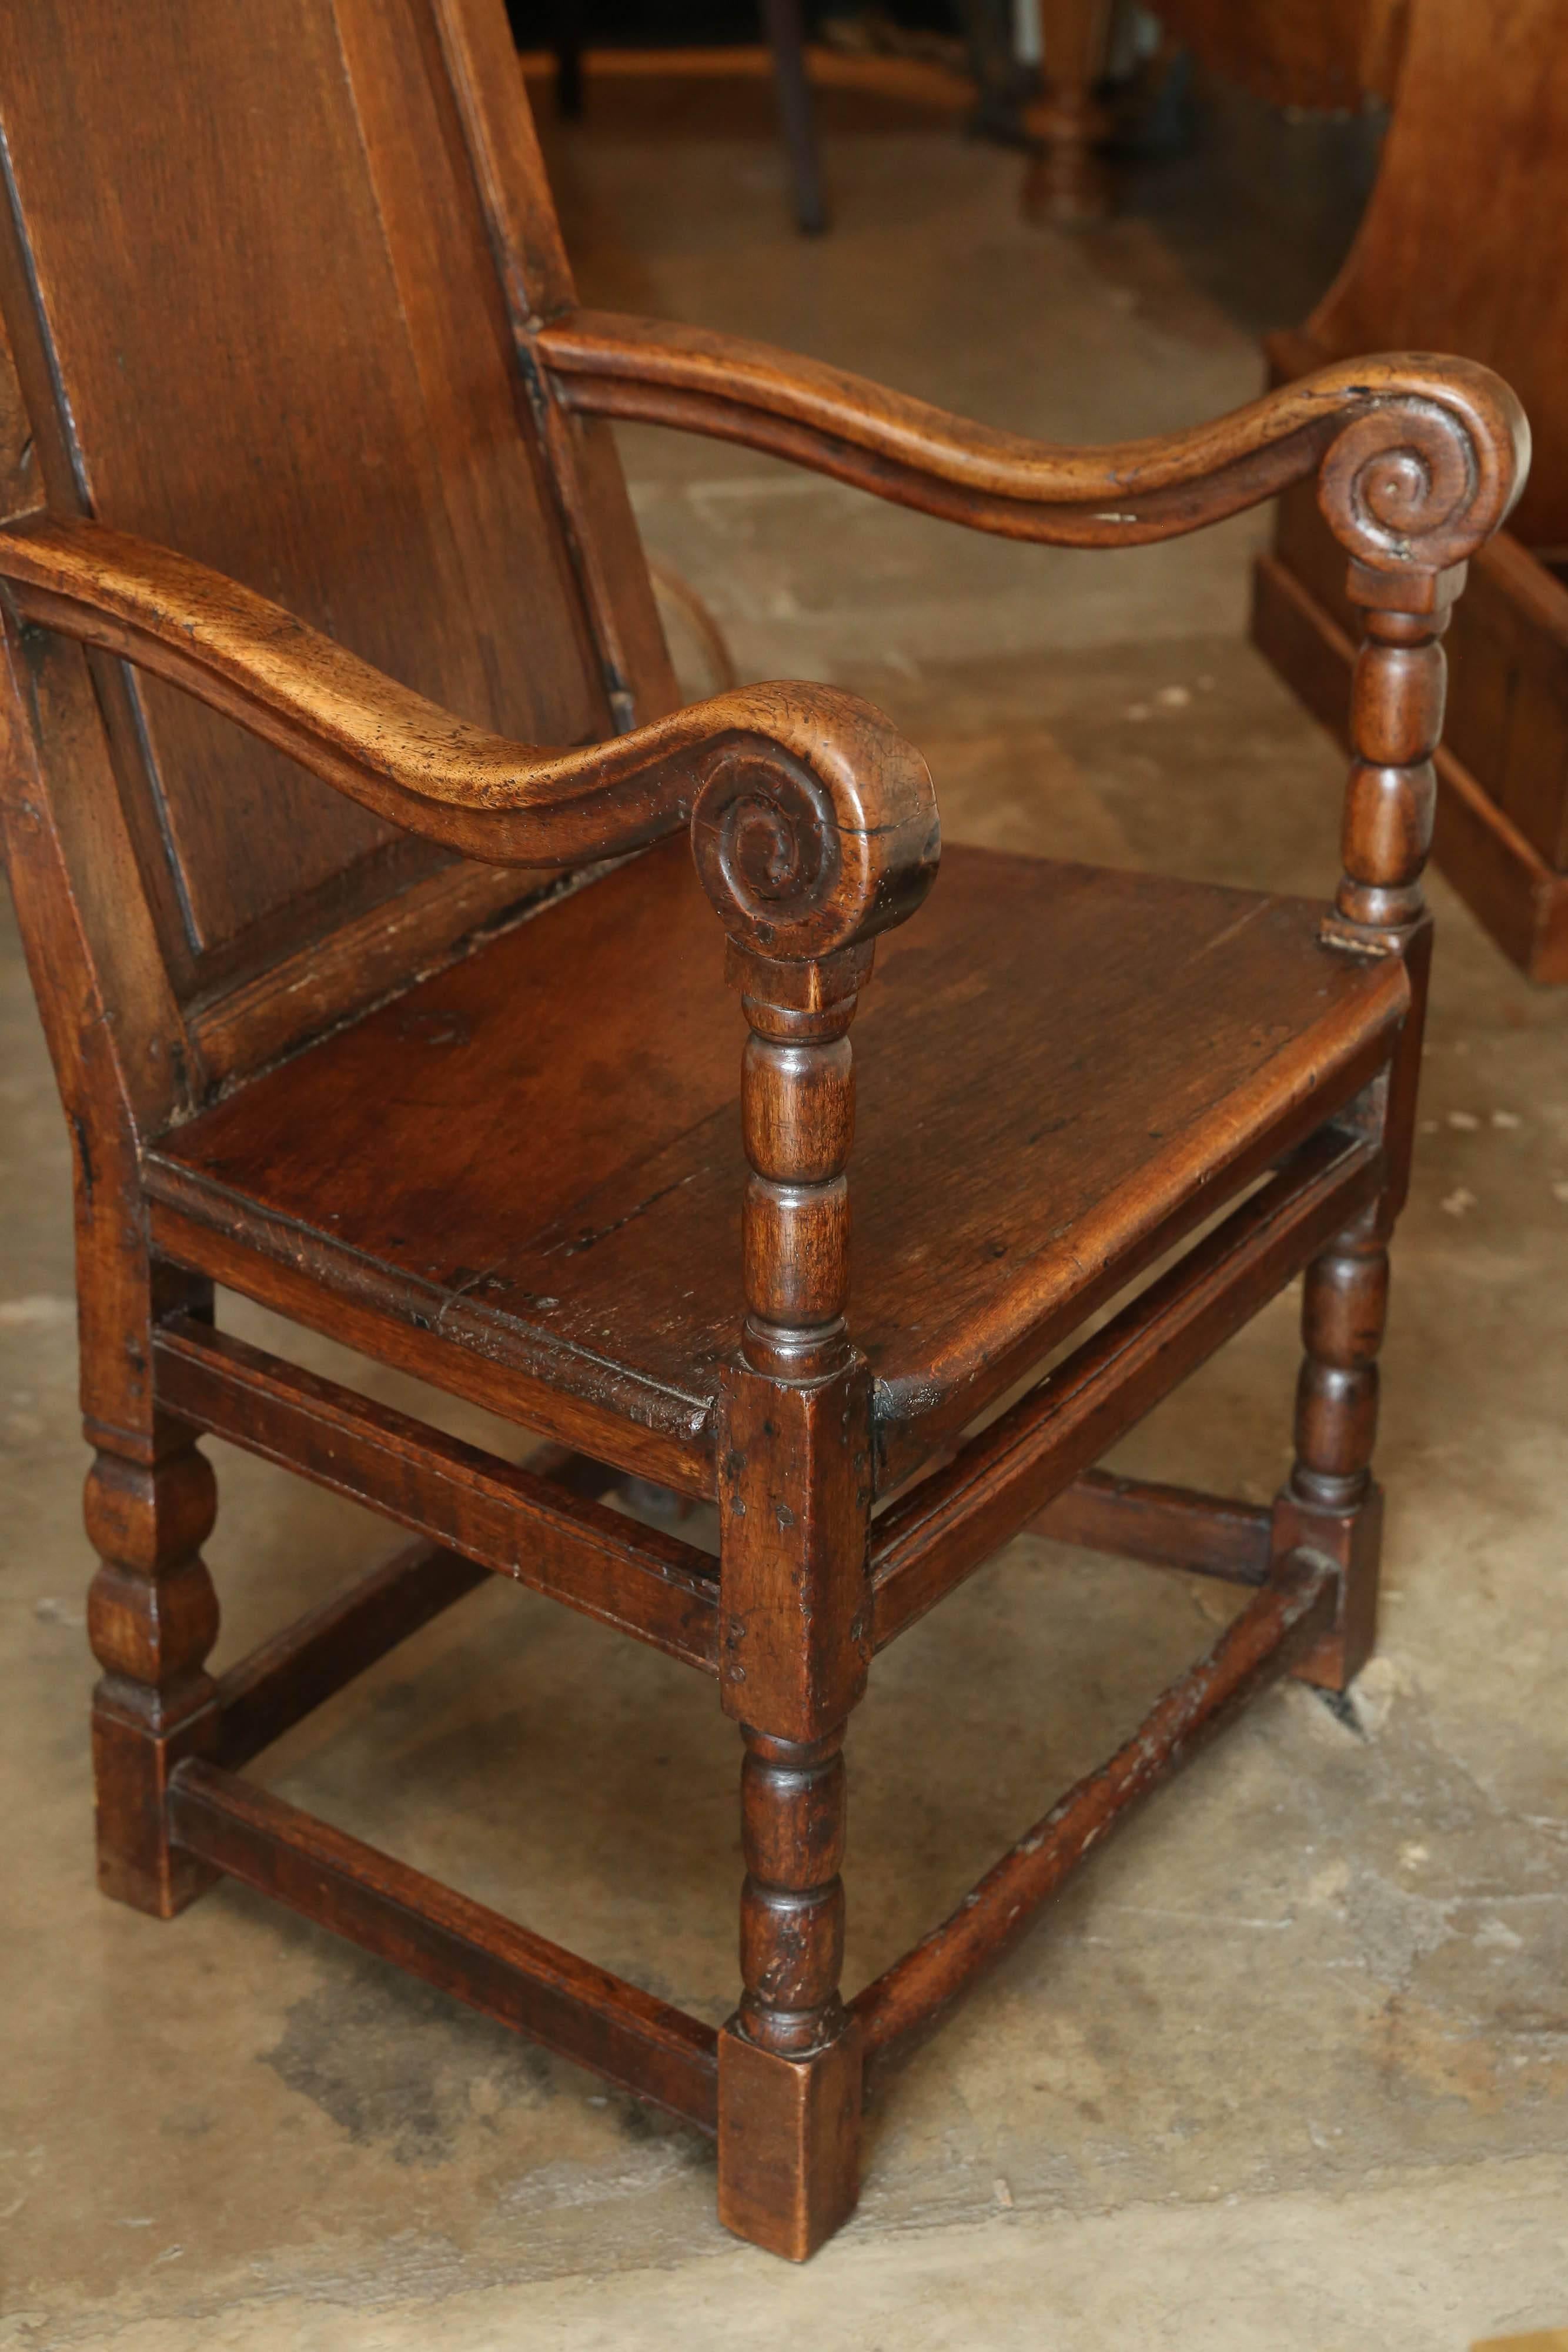 18th century oak welsh wainscot hall chair with beautifully worn arms from years of use. Simple design with a central carved detail at the top of the back. Great character in stretchers, as well. Very, very sturdy. Surprisingly comfortable.  Split